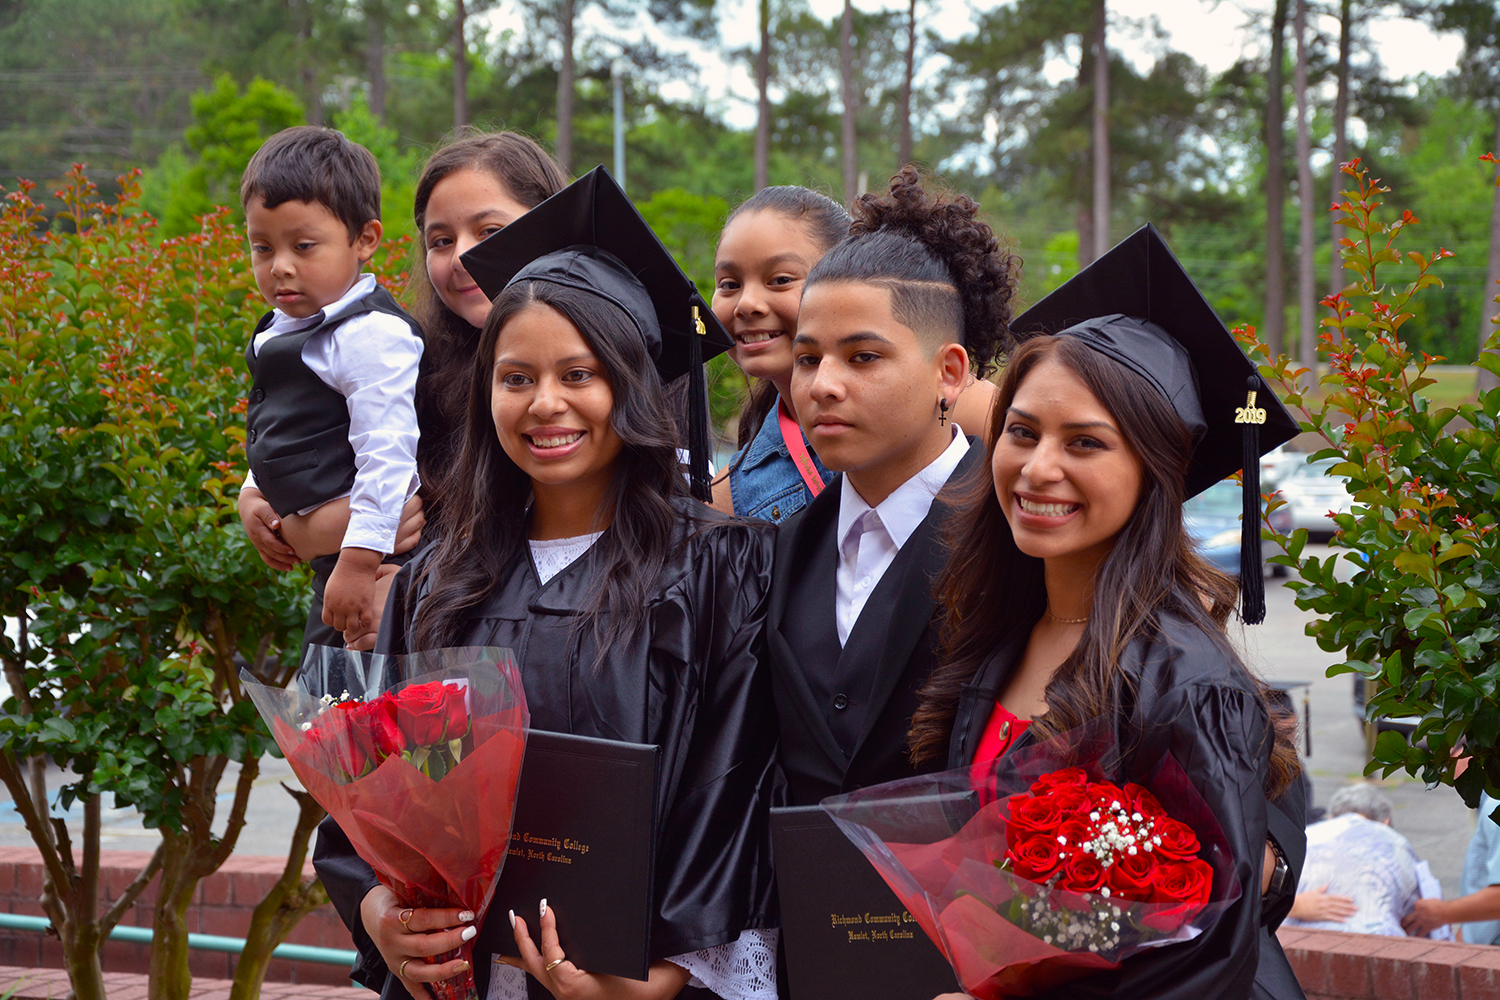 Two graduates stand with family members after the graduation ceremony